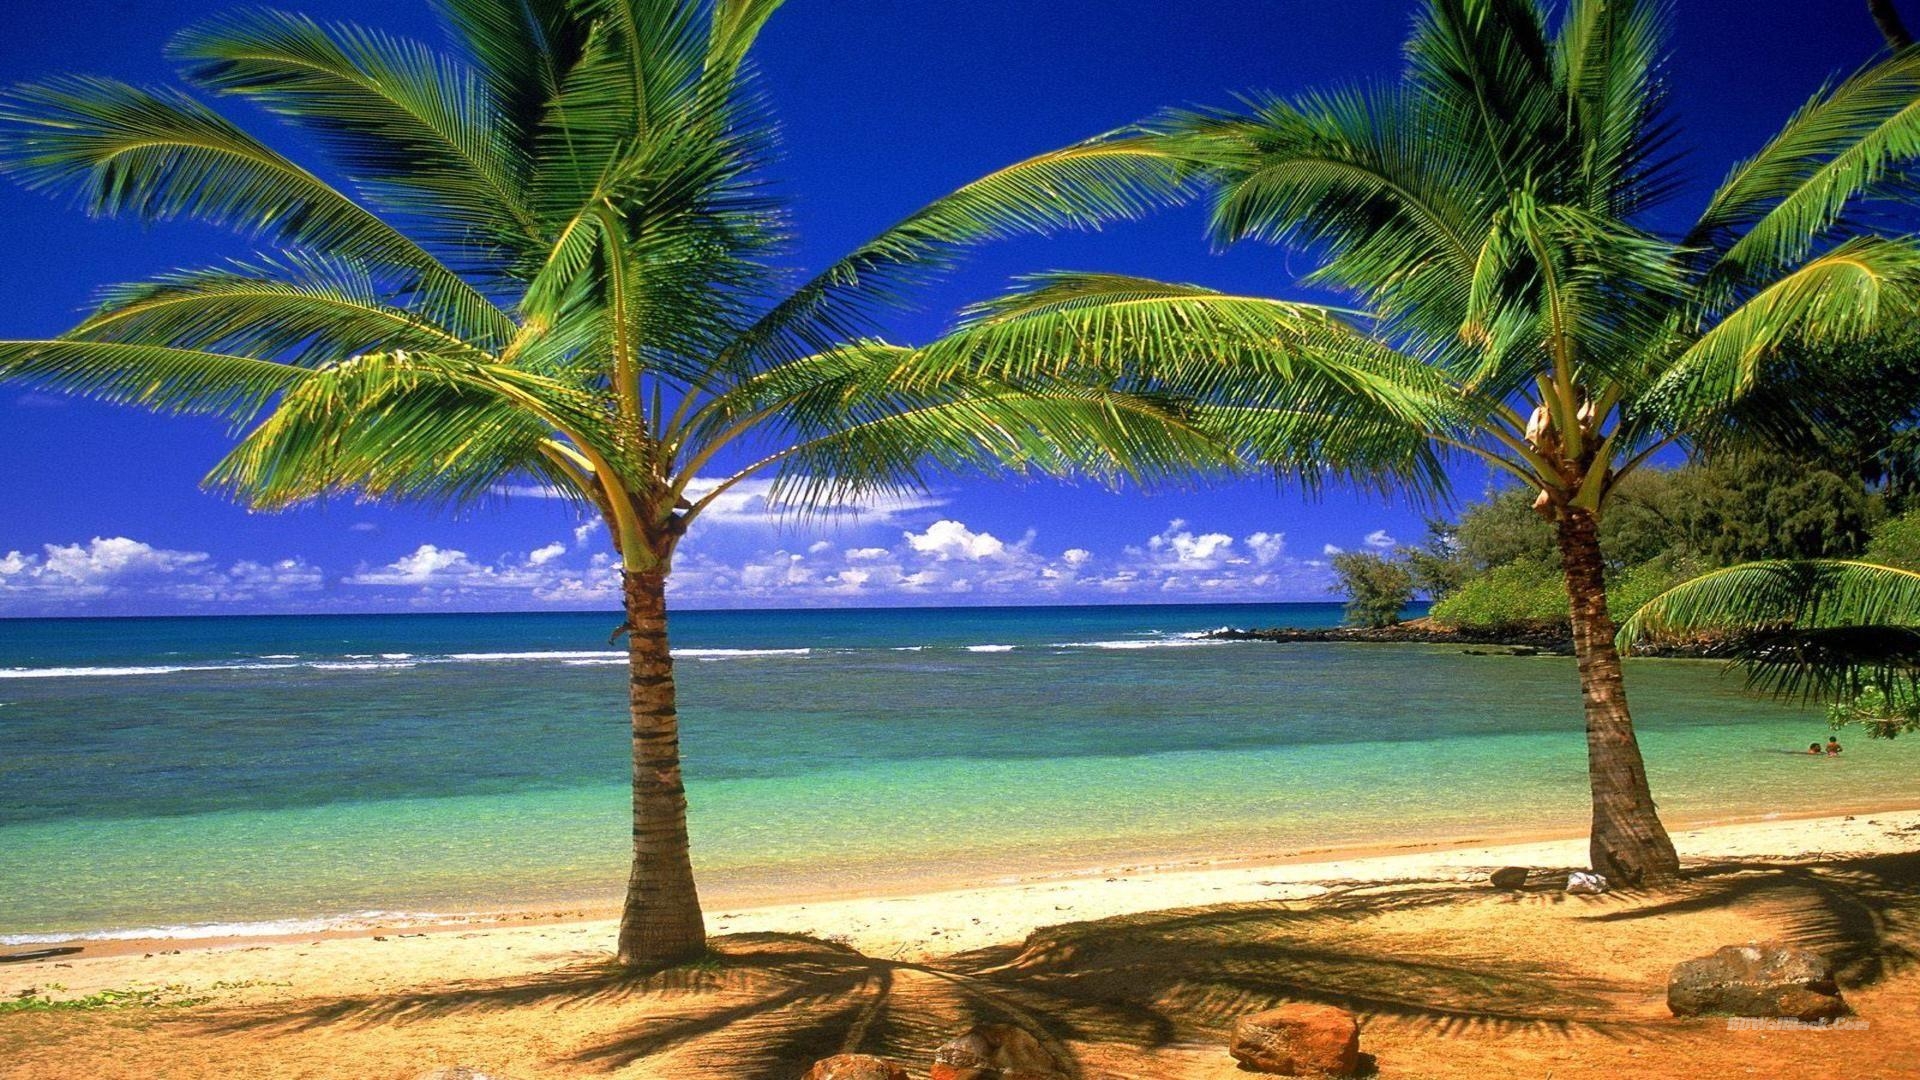 Beaches And Palm Trees - HD Wallpaper 